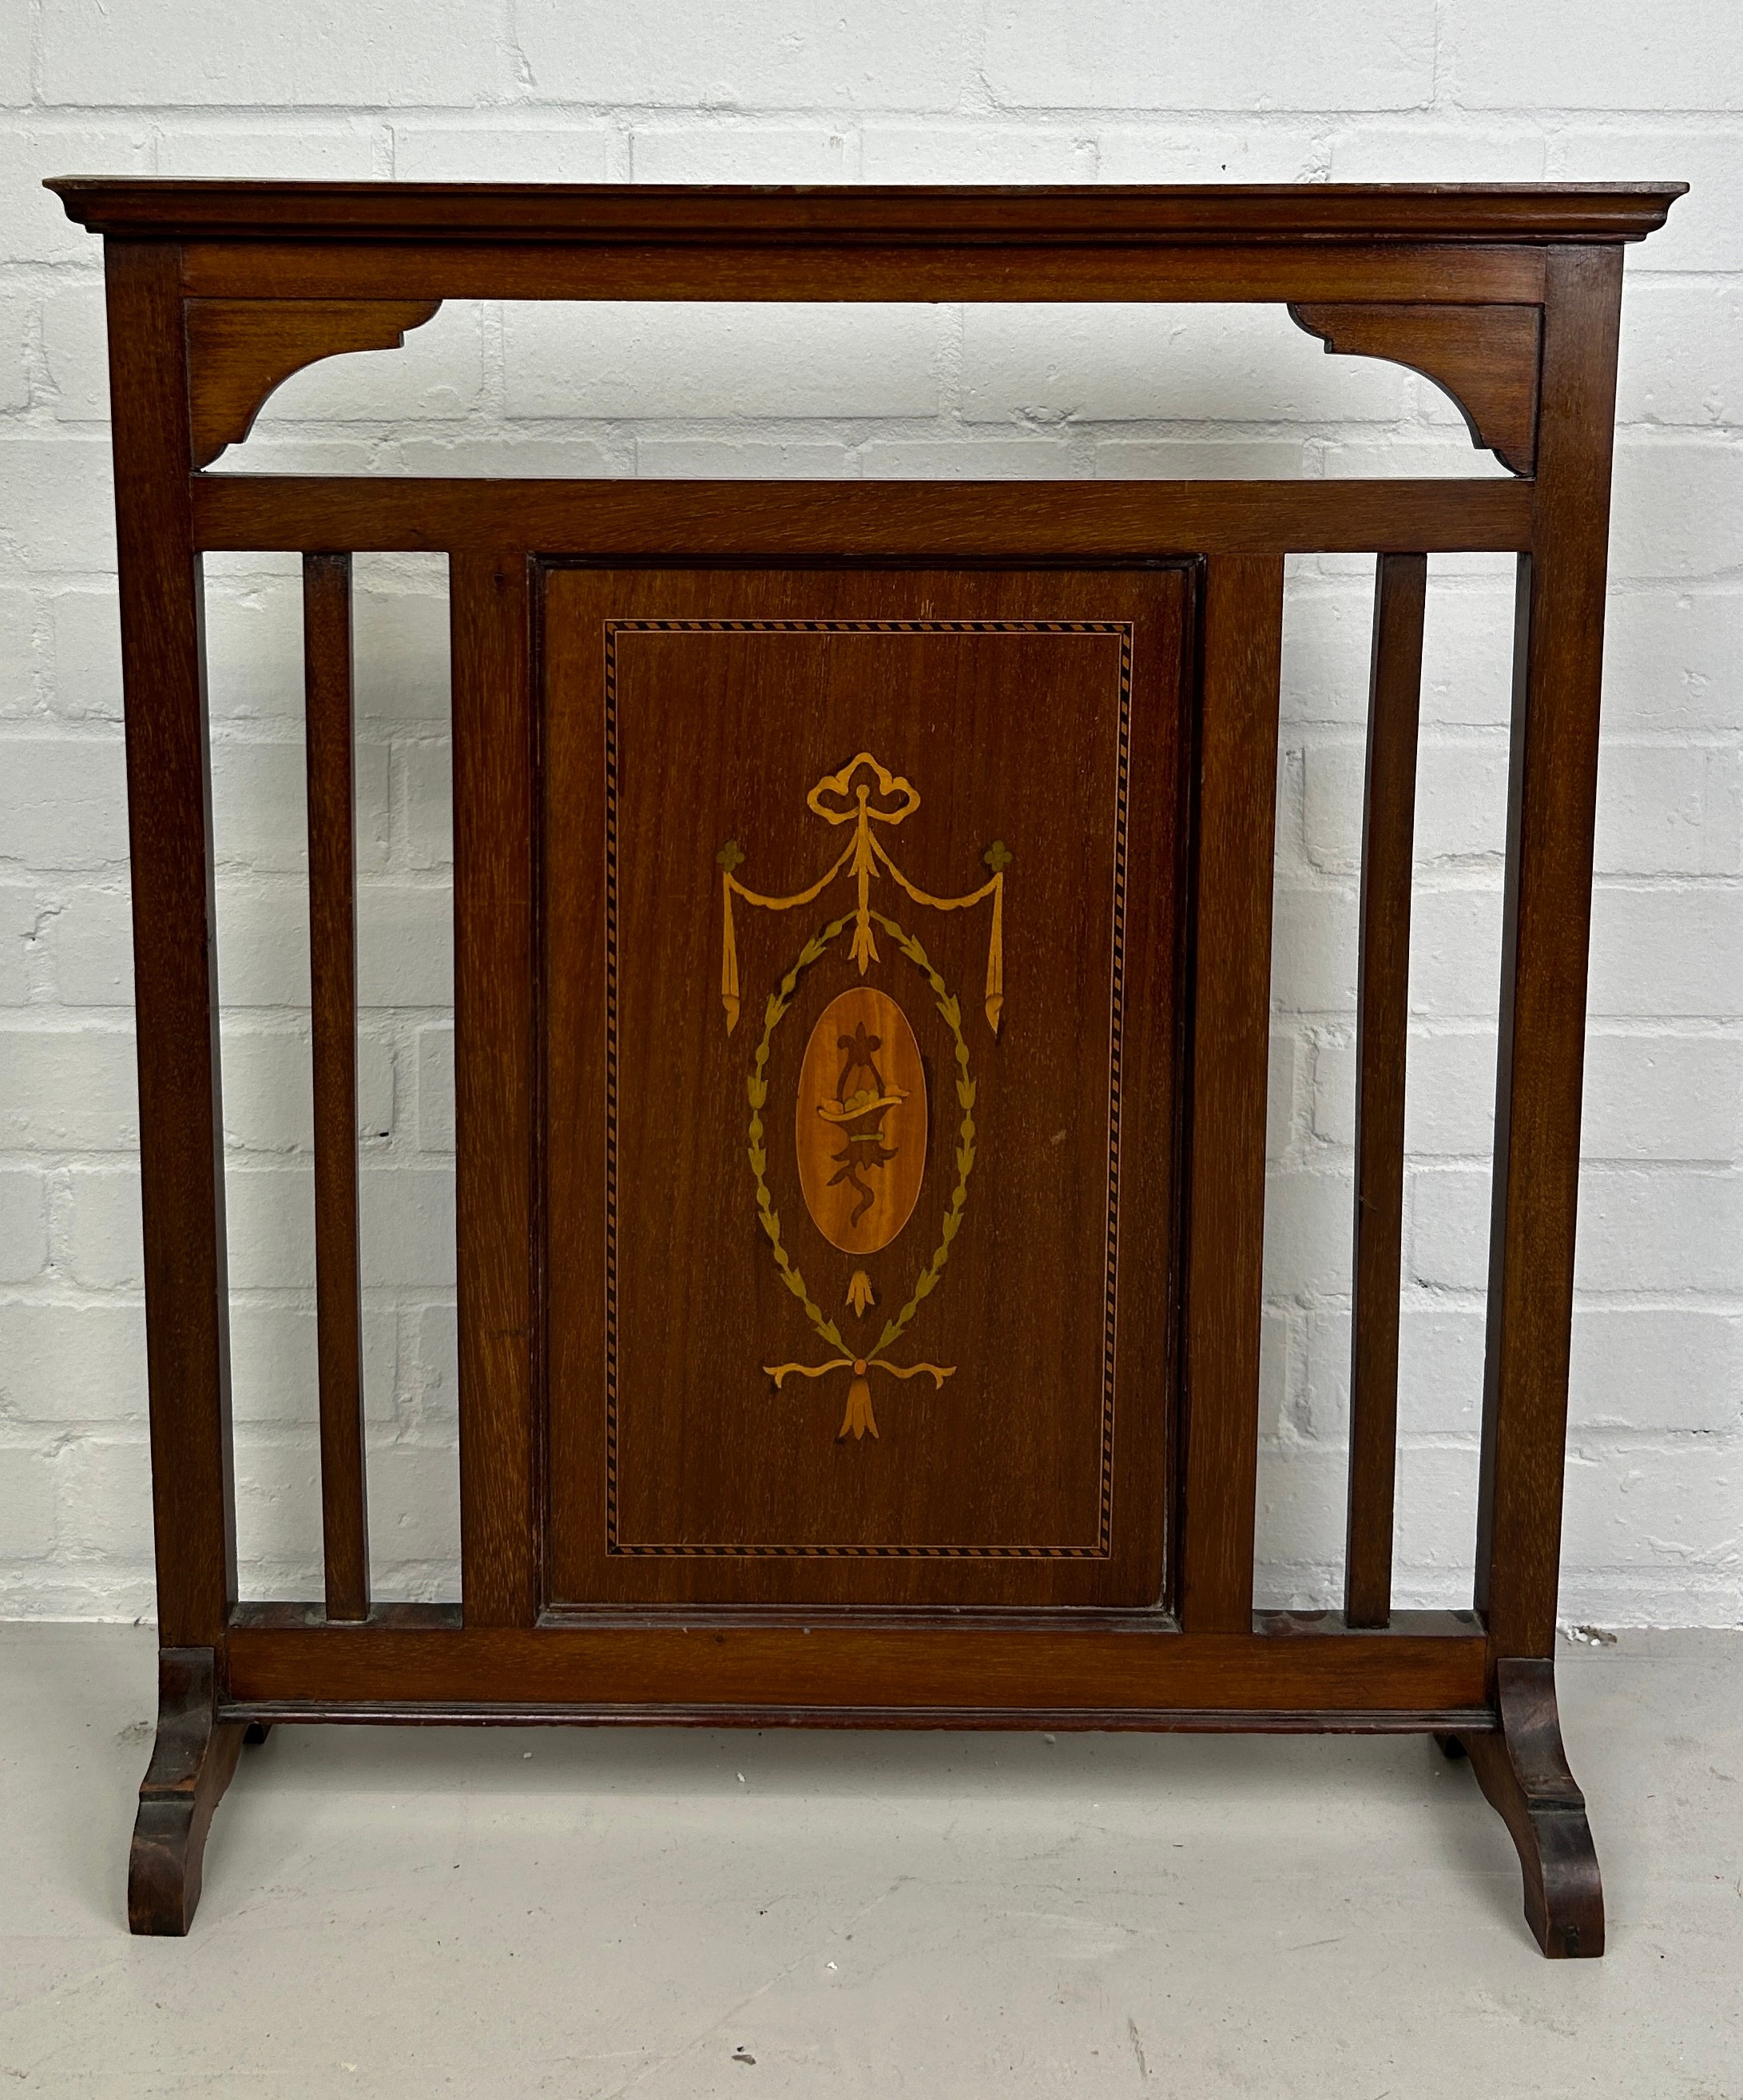 AN EDWARDIAN FIRE SCREEN WITH MARQUETRY INLAID DESIGN 72cm x 61cm x 17cm